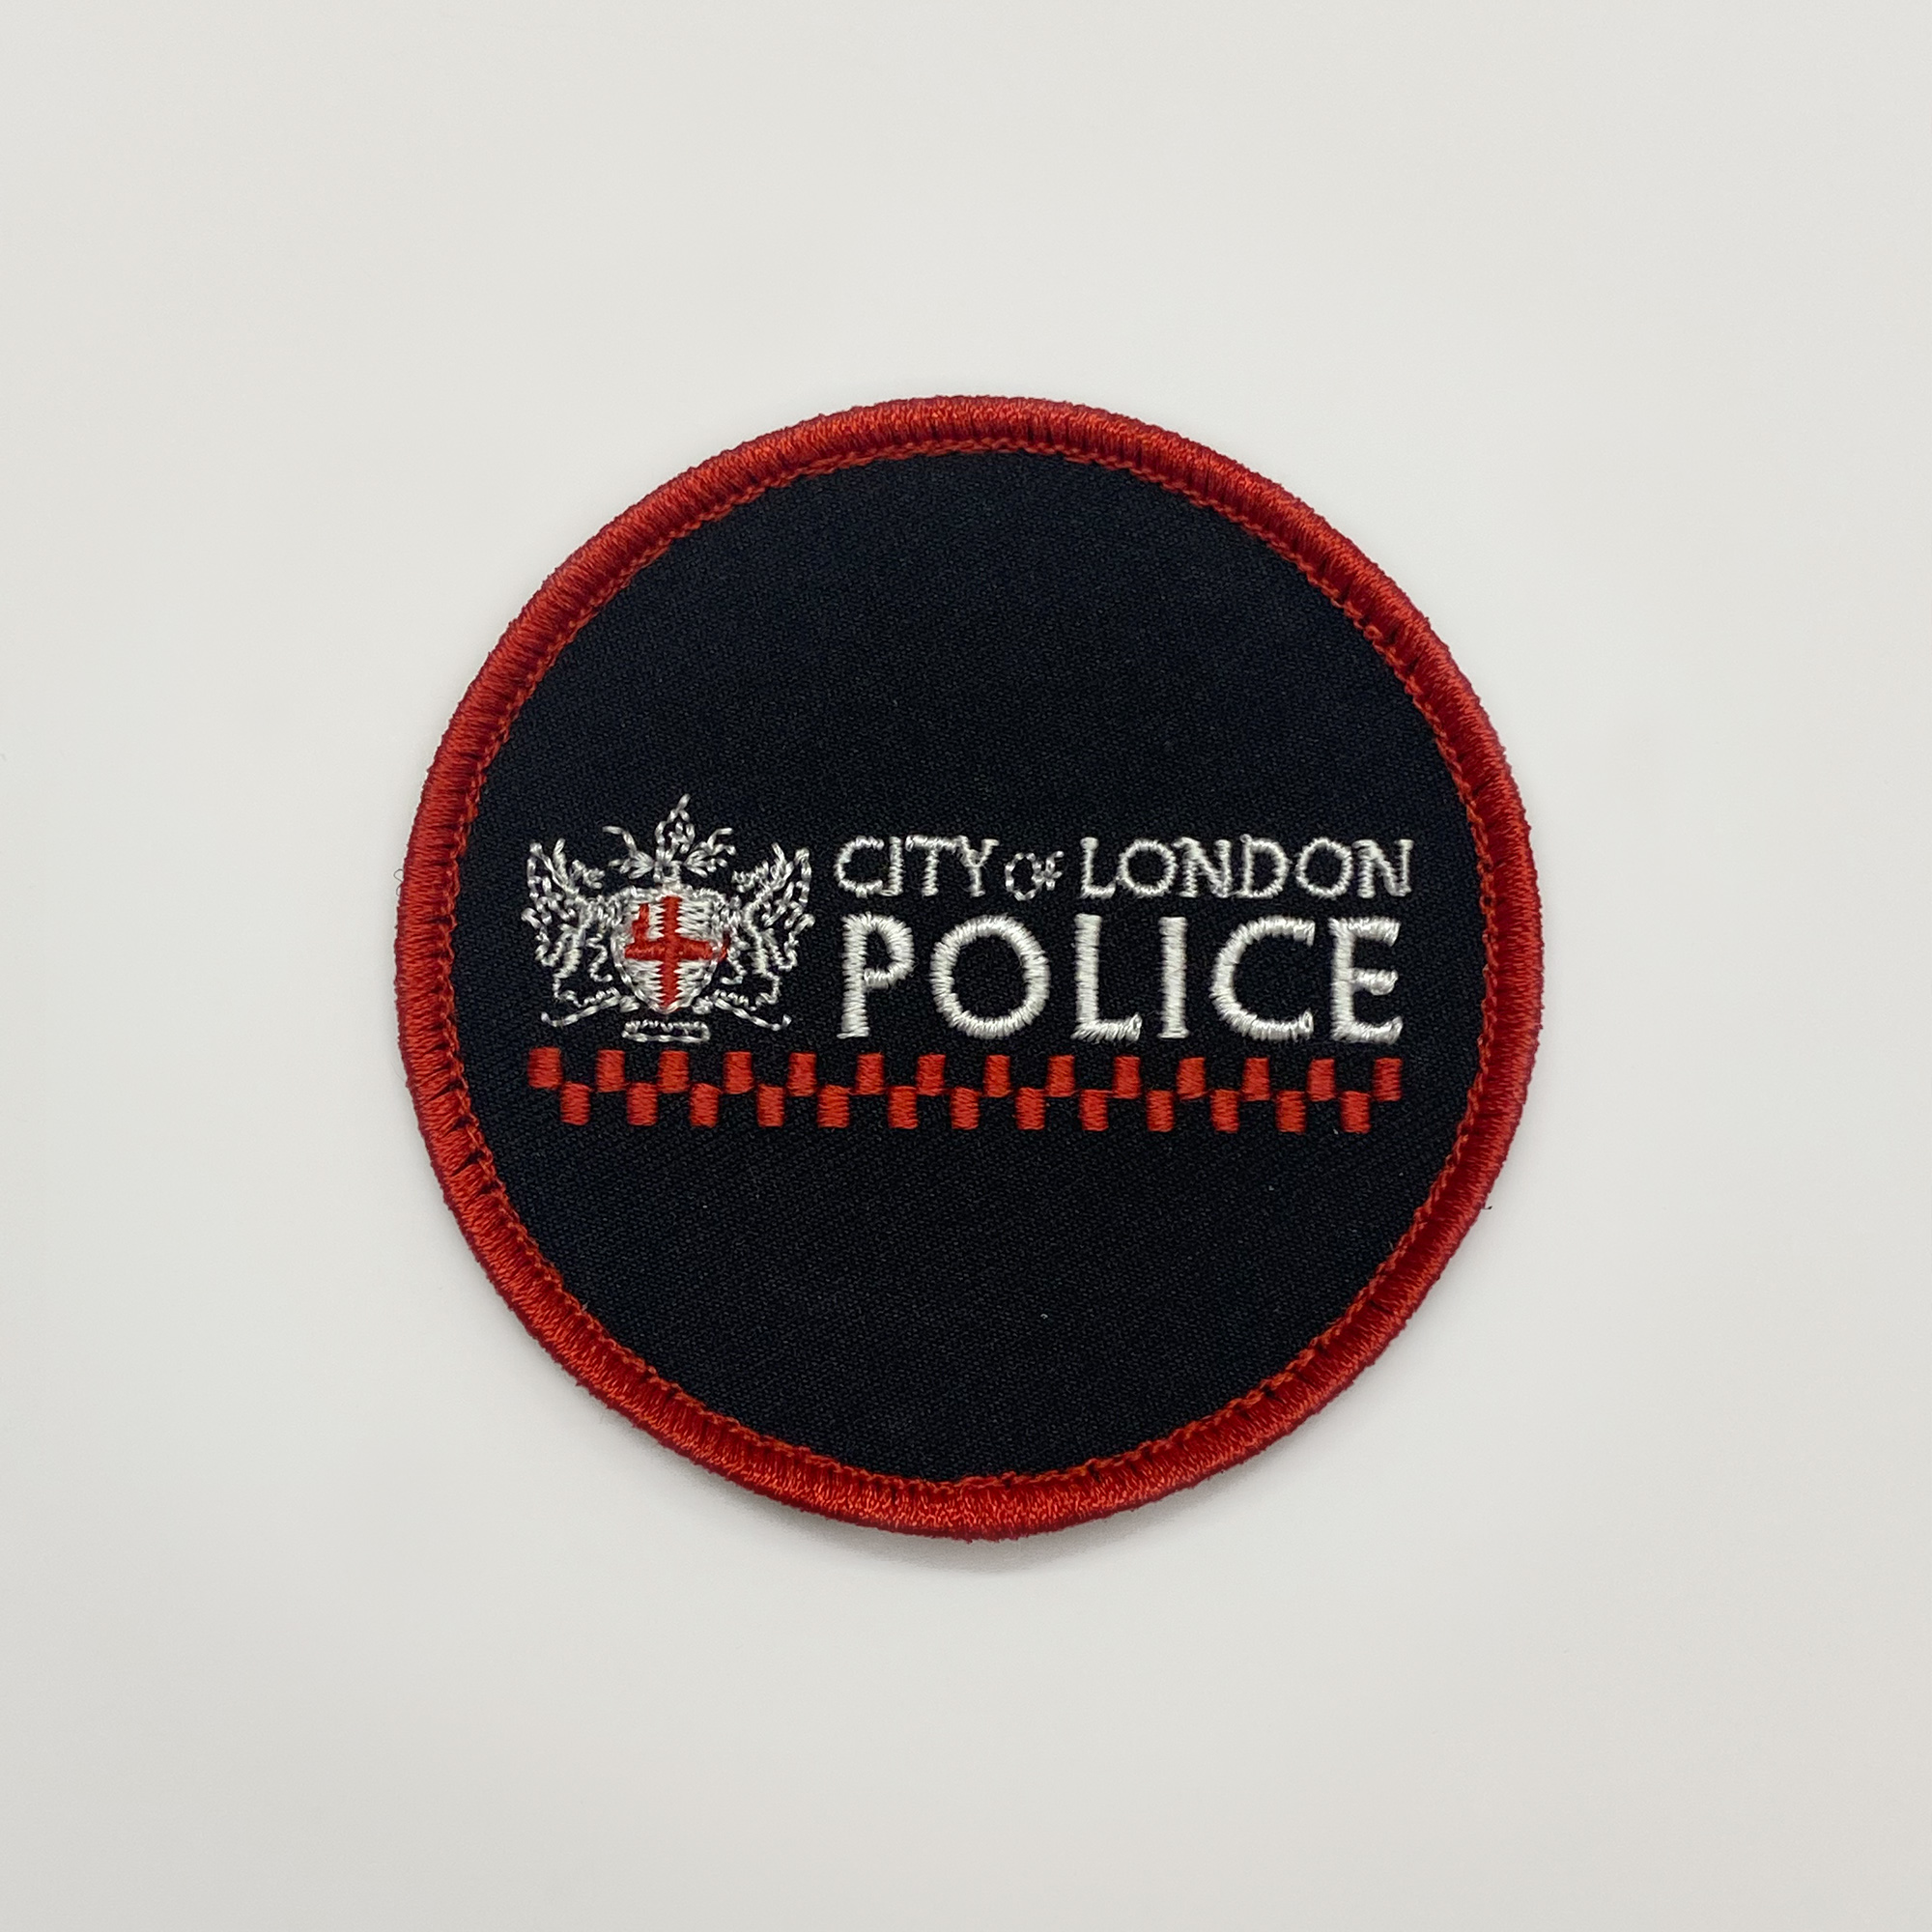 ON CIRCULAR POLICE CLOTH PATCH  IRON Details about   METROPOLITAN POLICE LONDON  ENGLAND 